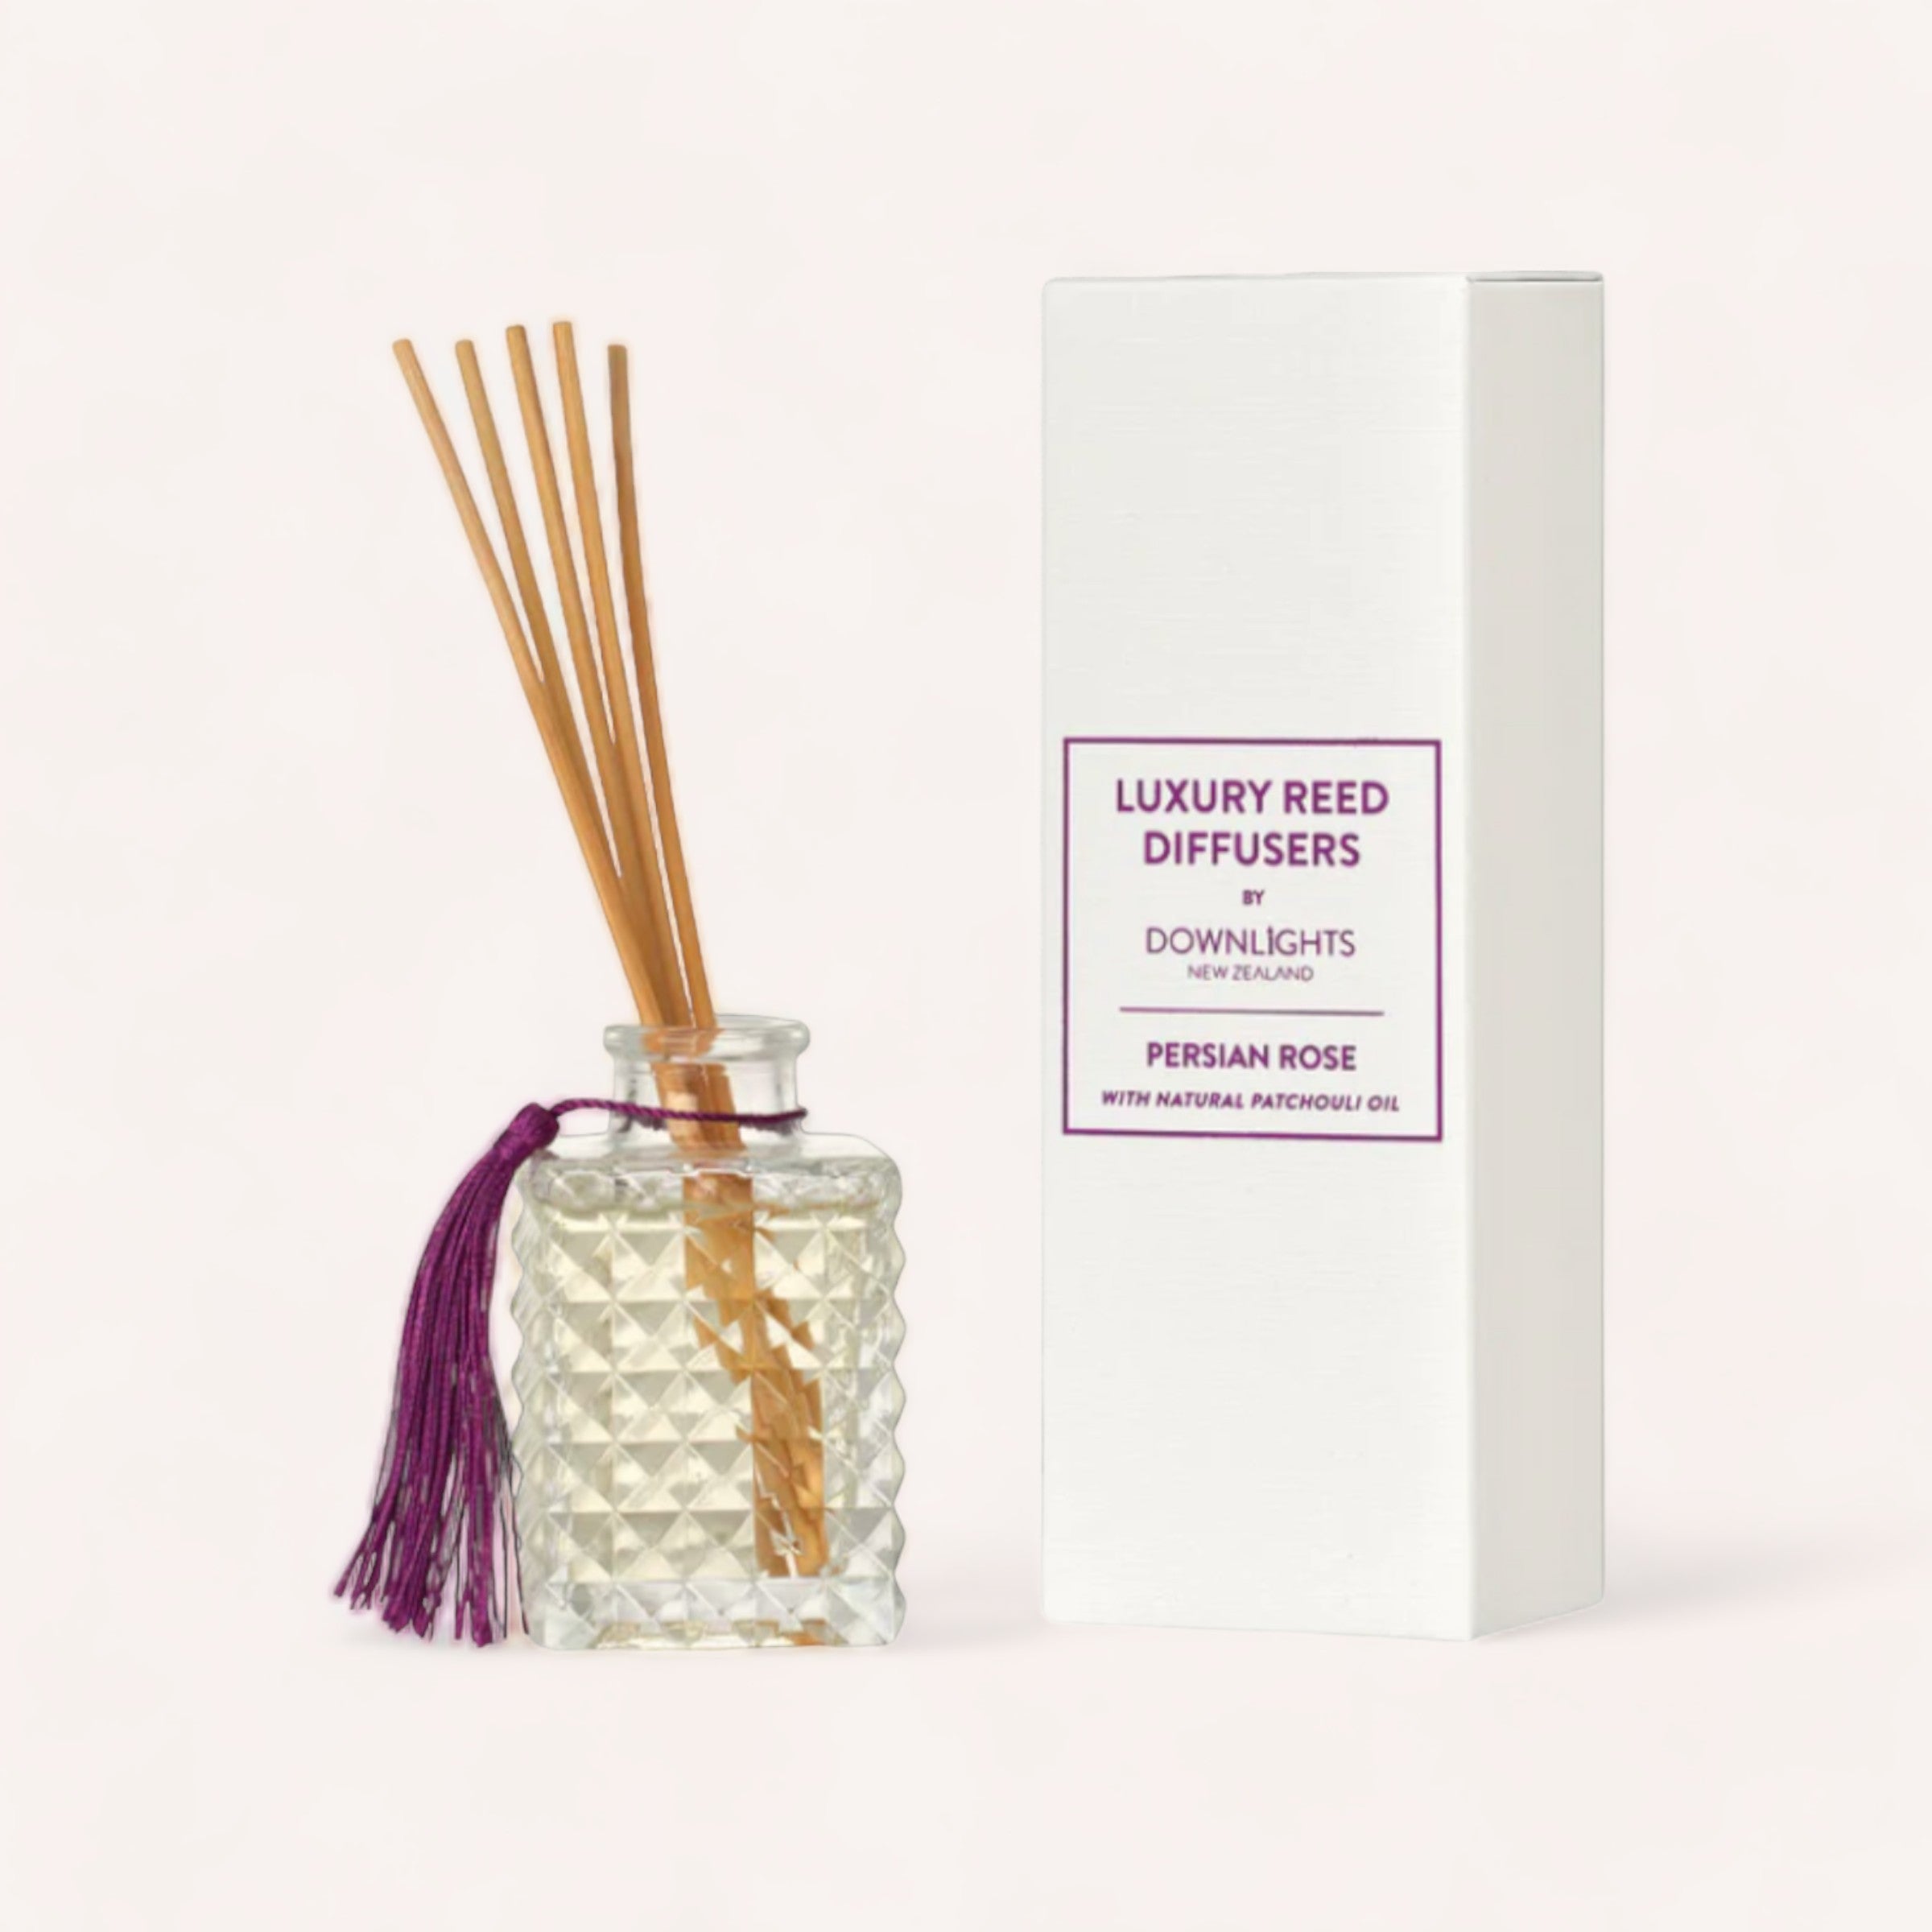 An elegant Persian Rose diffuser by Downlights with a brandied sweet fragrance, displayed next to its packaging.